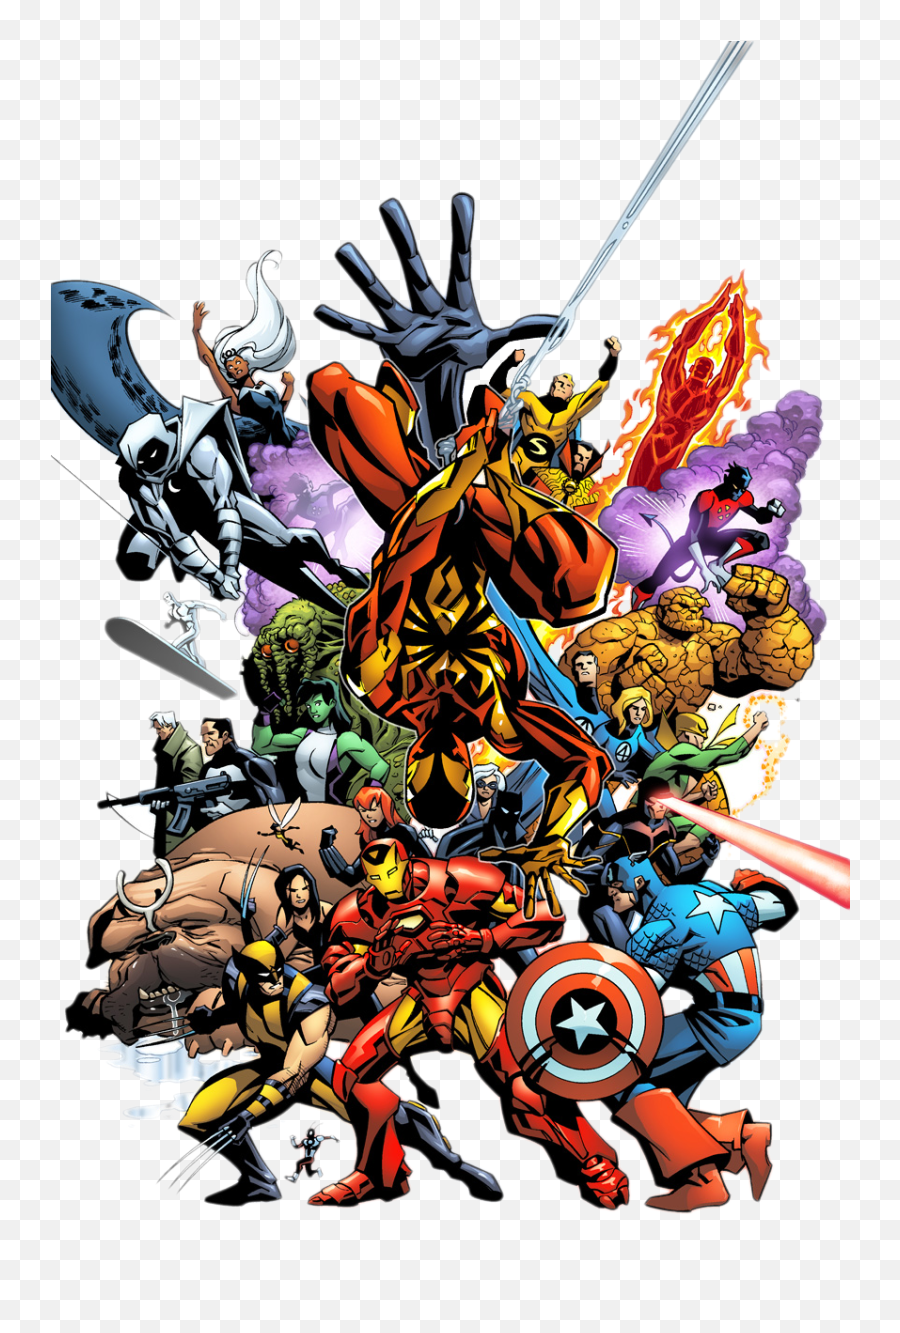 My Heroe Comic The Avengers Png - Marvel Team Up 2019,Avengers Png